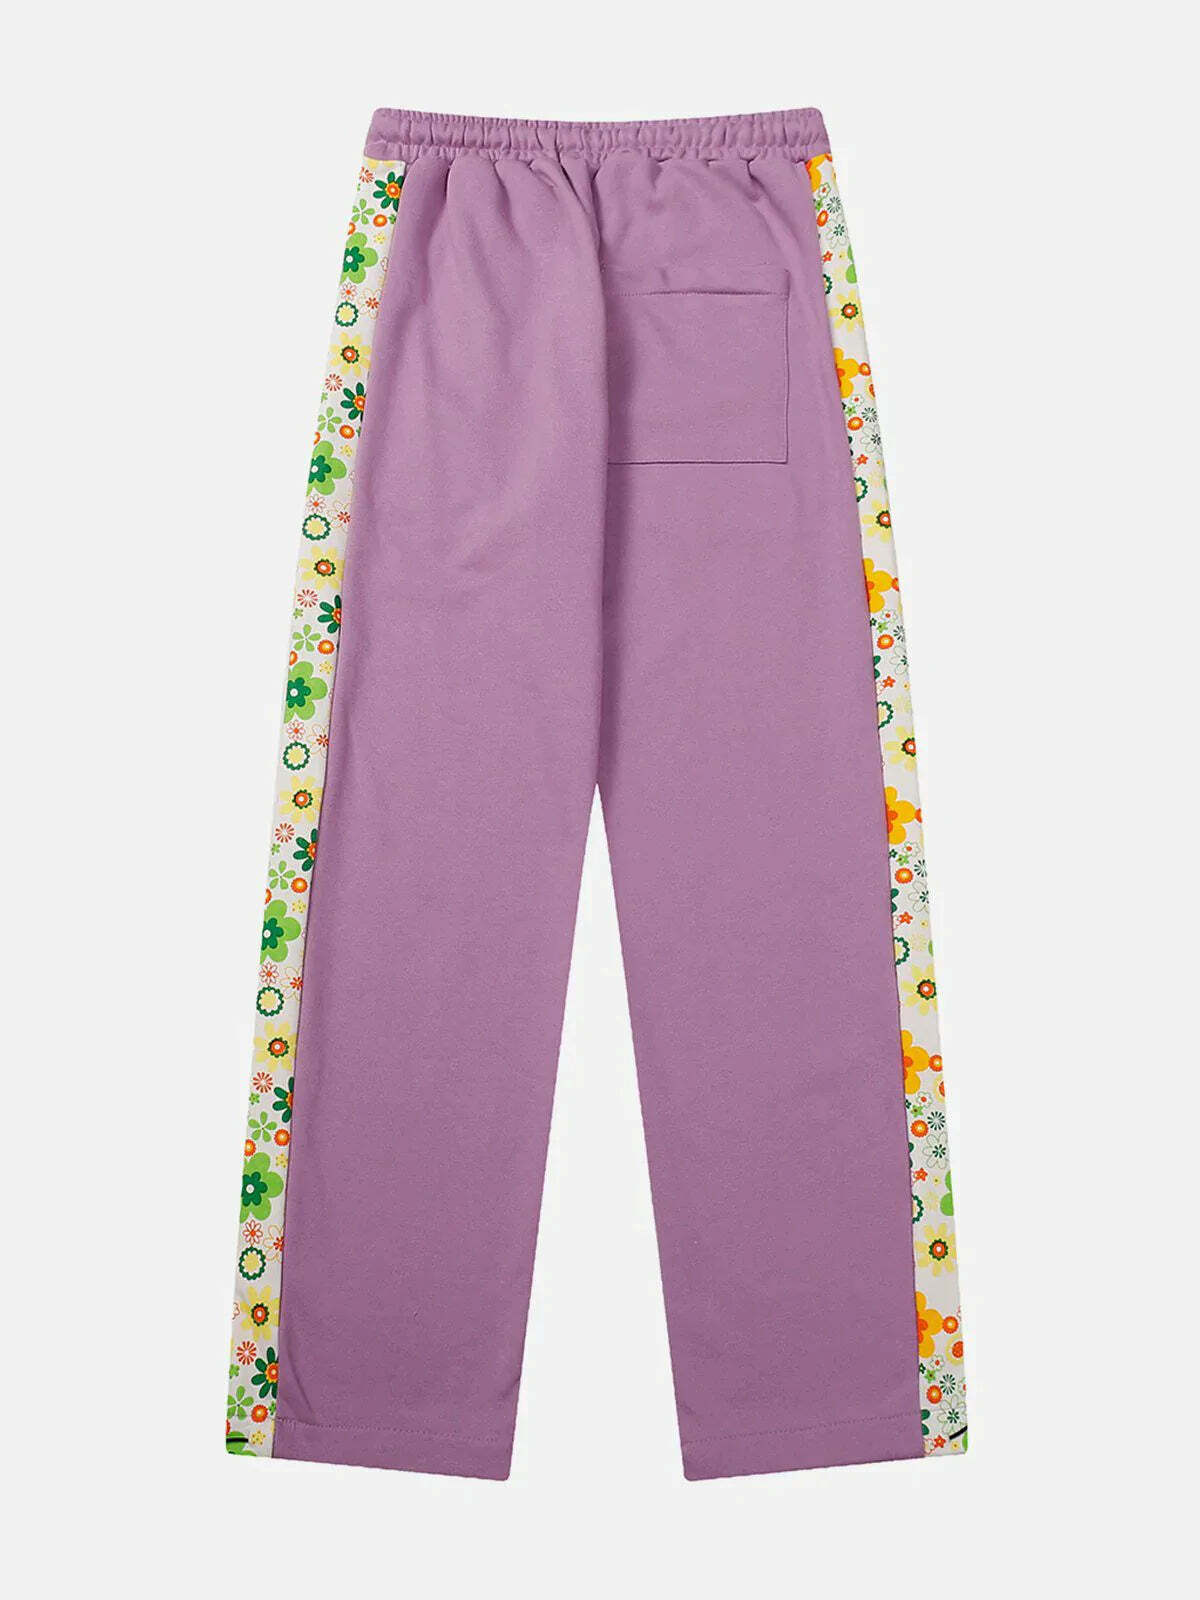 floral side stripe pants casual chic & vibrant 6710